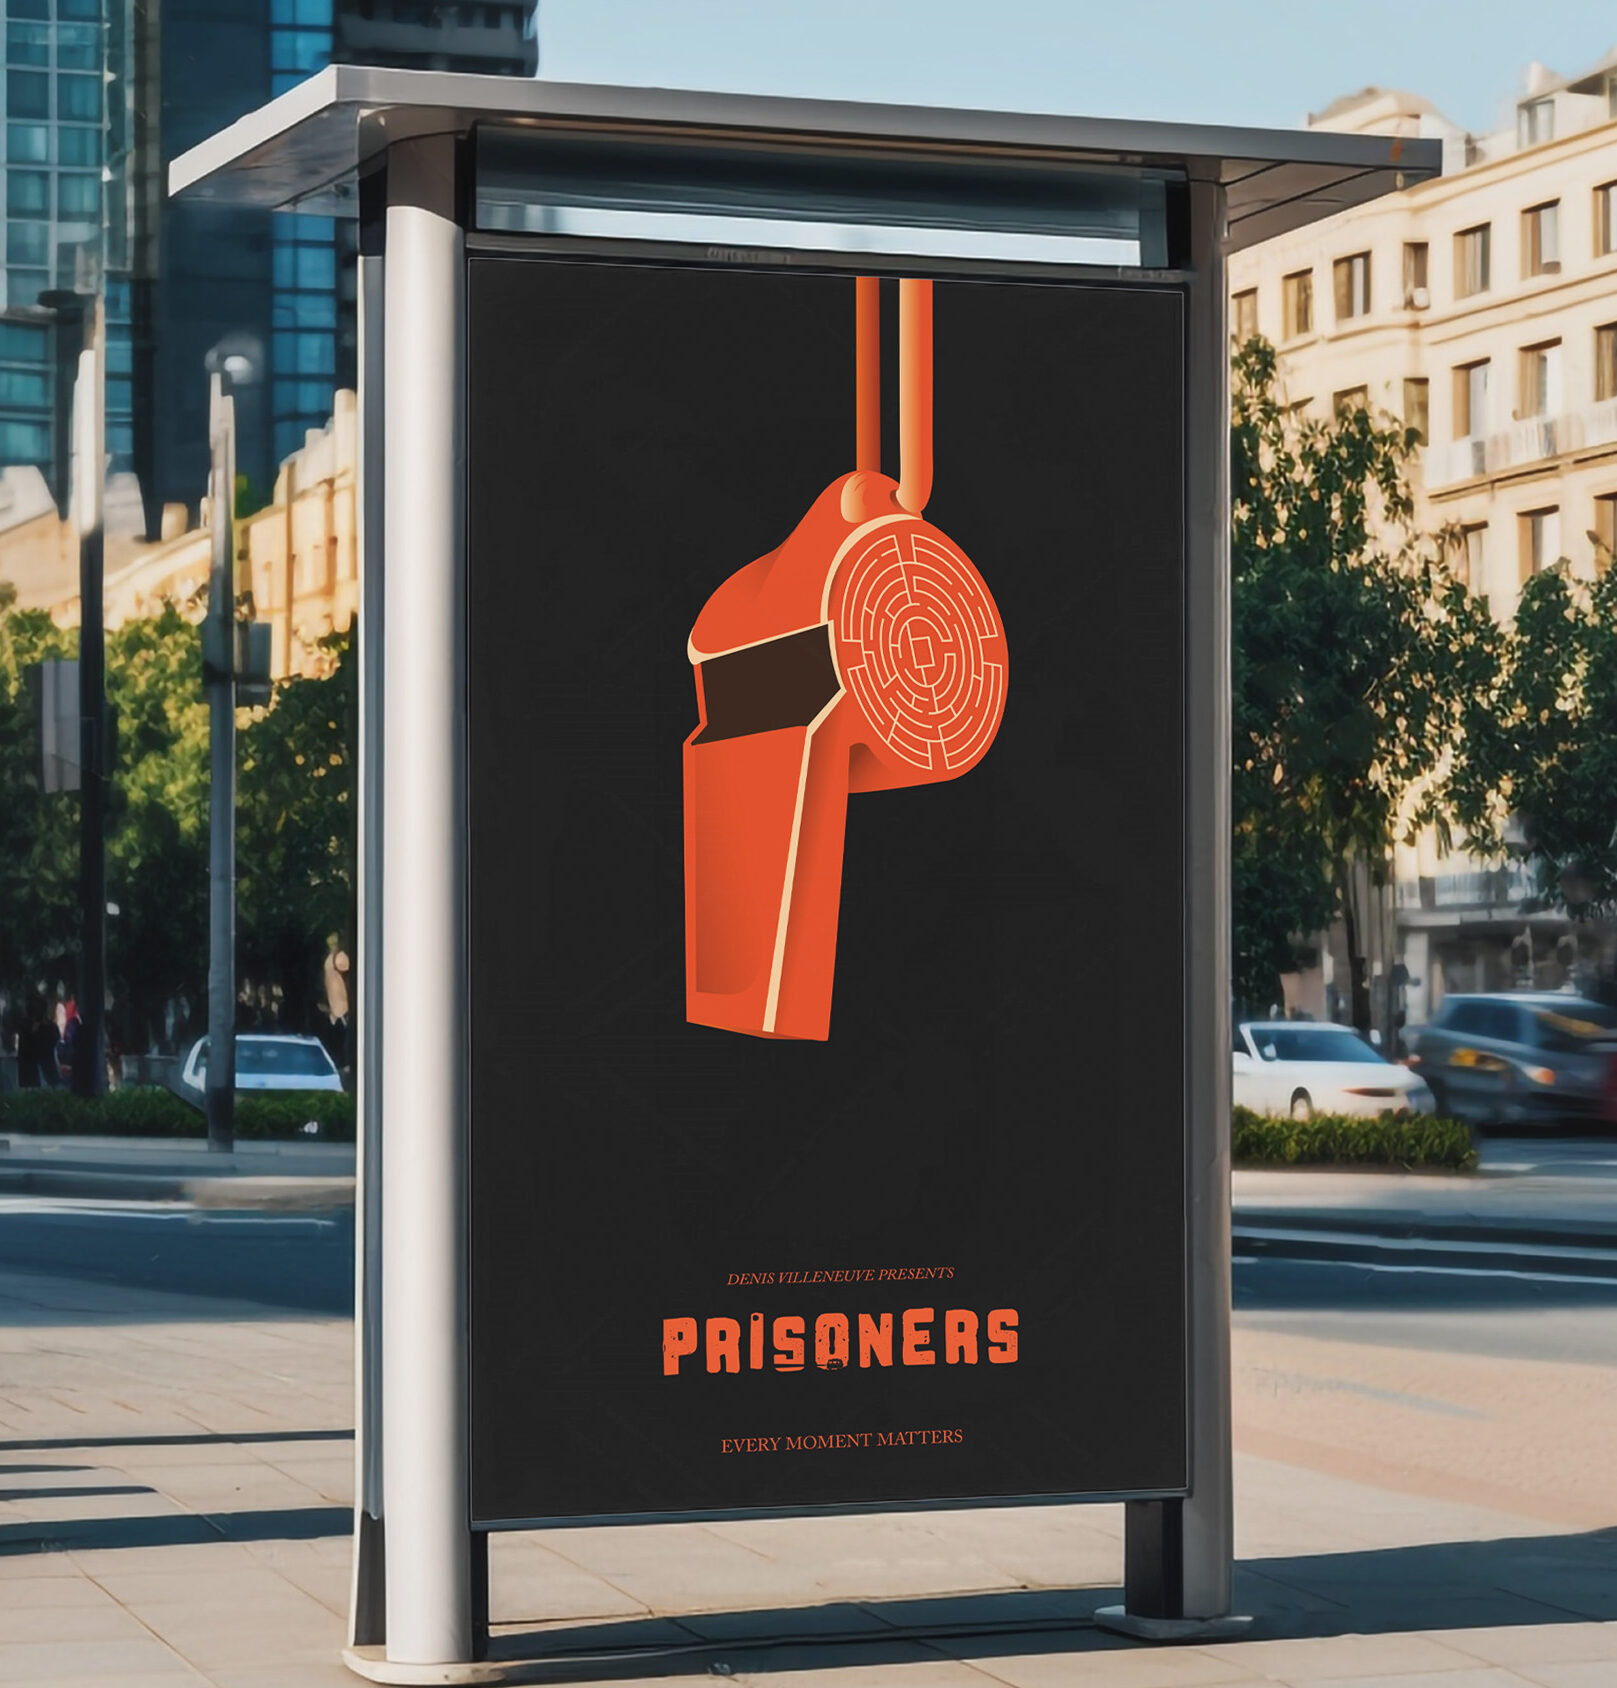 The minimalist illustrated movie poster for Prisoners. It features a red whistle with a maze carved into the side, on a black background. It is display on a sign alongside a urban landscape.